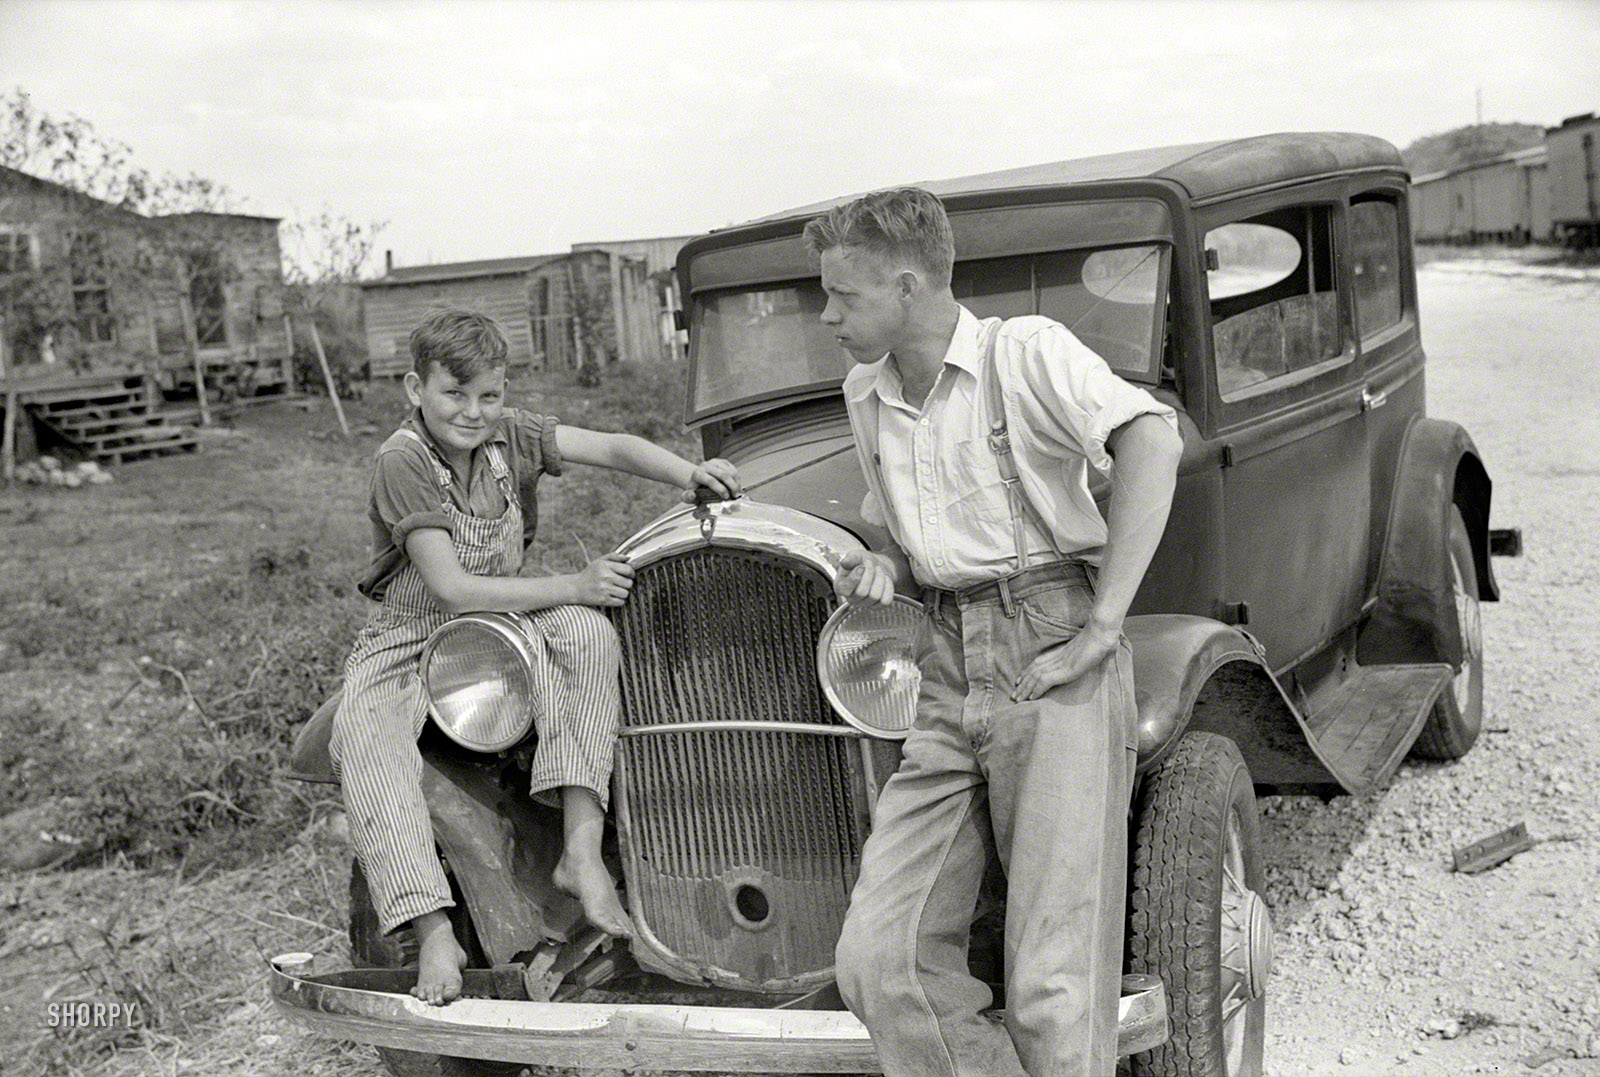 February 1939. "Migrant laborer's family near Canal Point packinghouse, Florida." 35mm nitrate negative by Marion Post Wolcott. View full size.